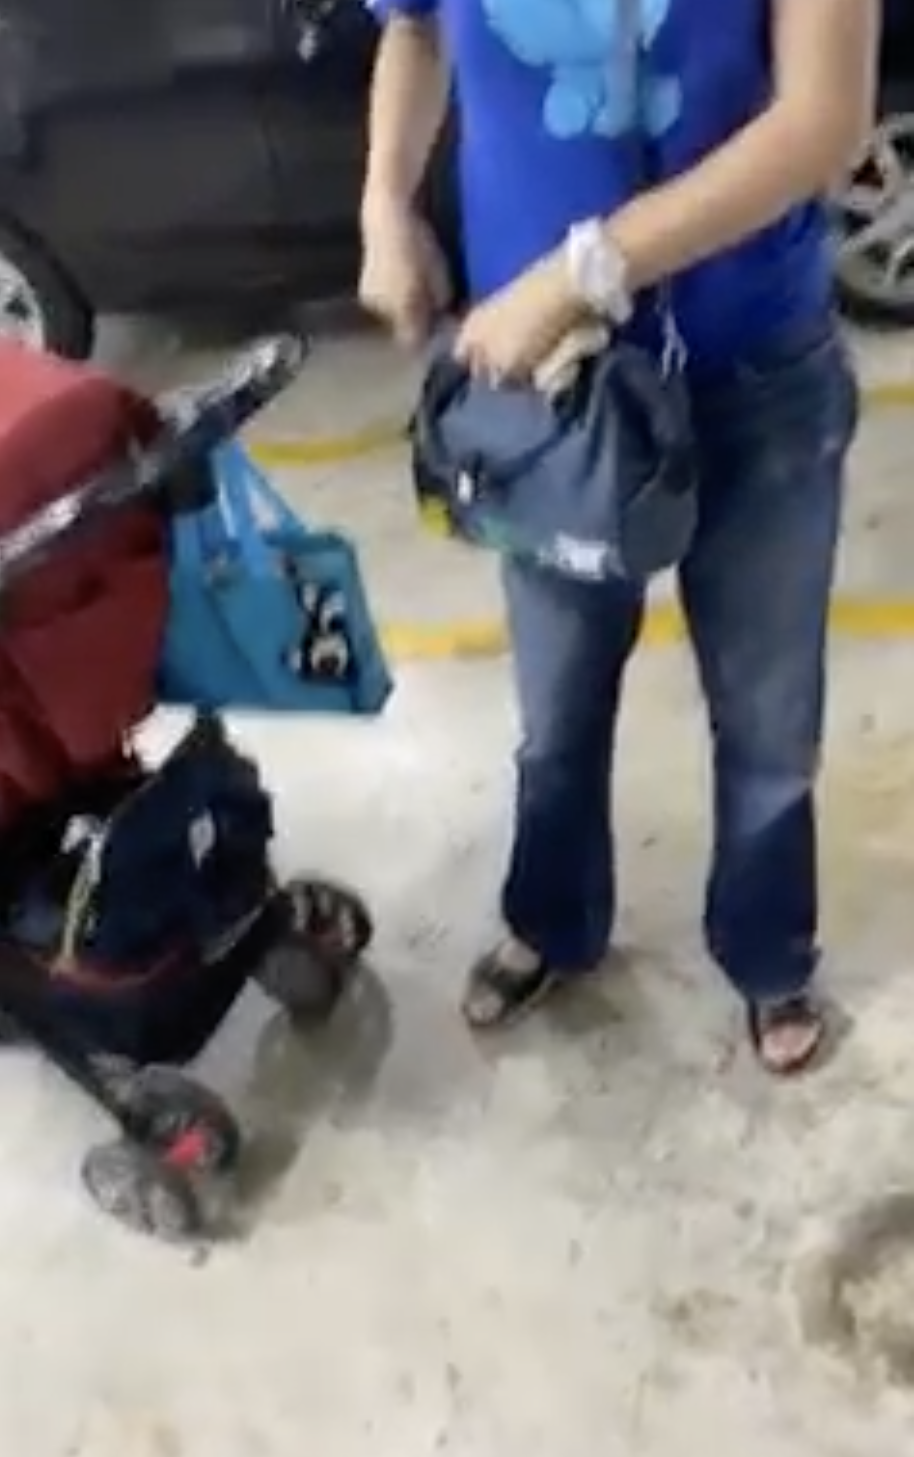 [video] 'parking' her baby stroller in spot while waiting for husband to park their car